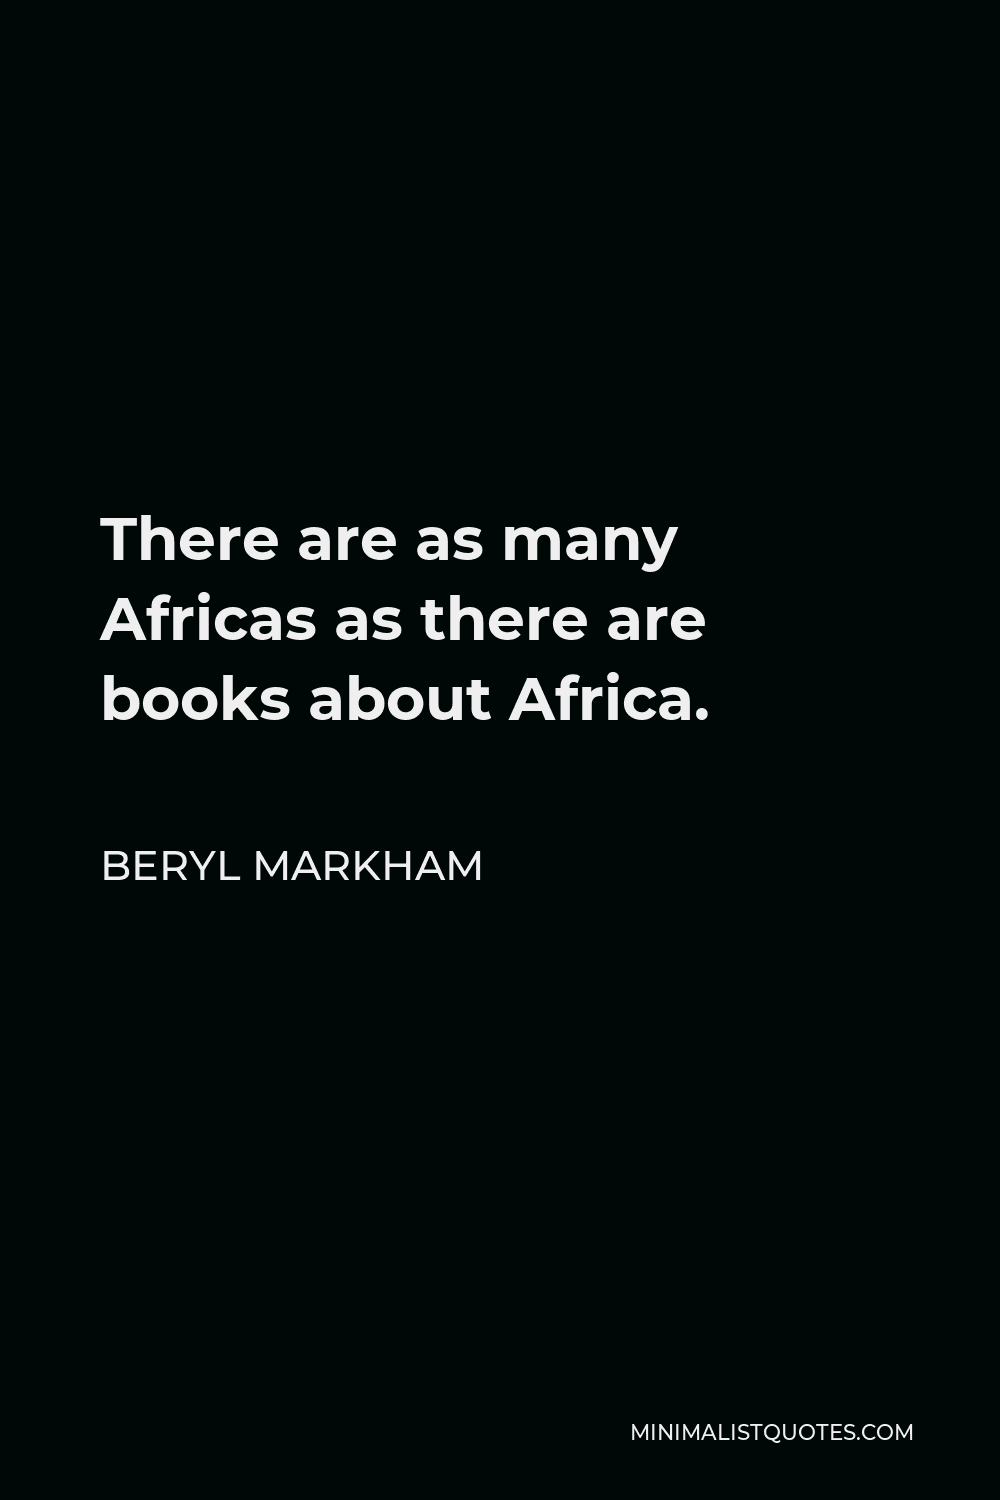 Beryl Markham Quote - There are as many Africas as there are books about Africa.